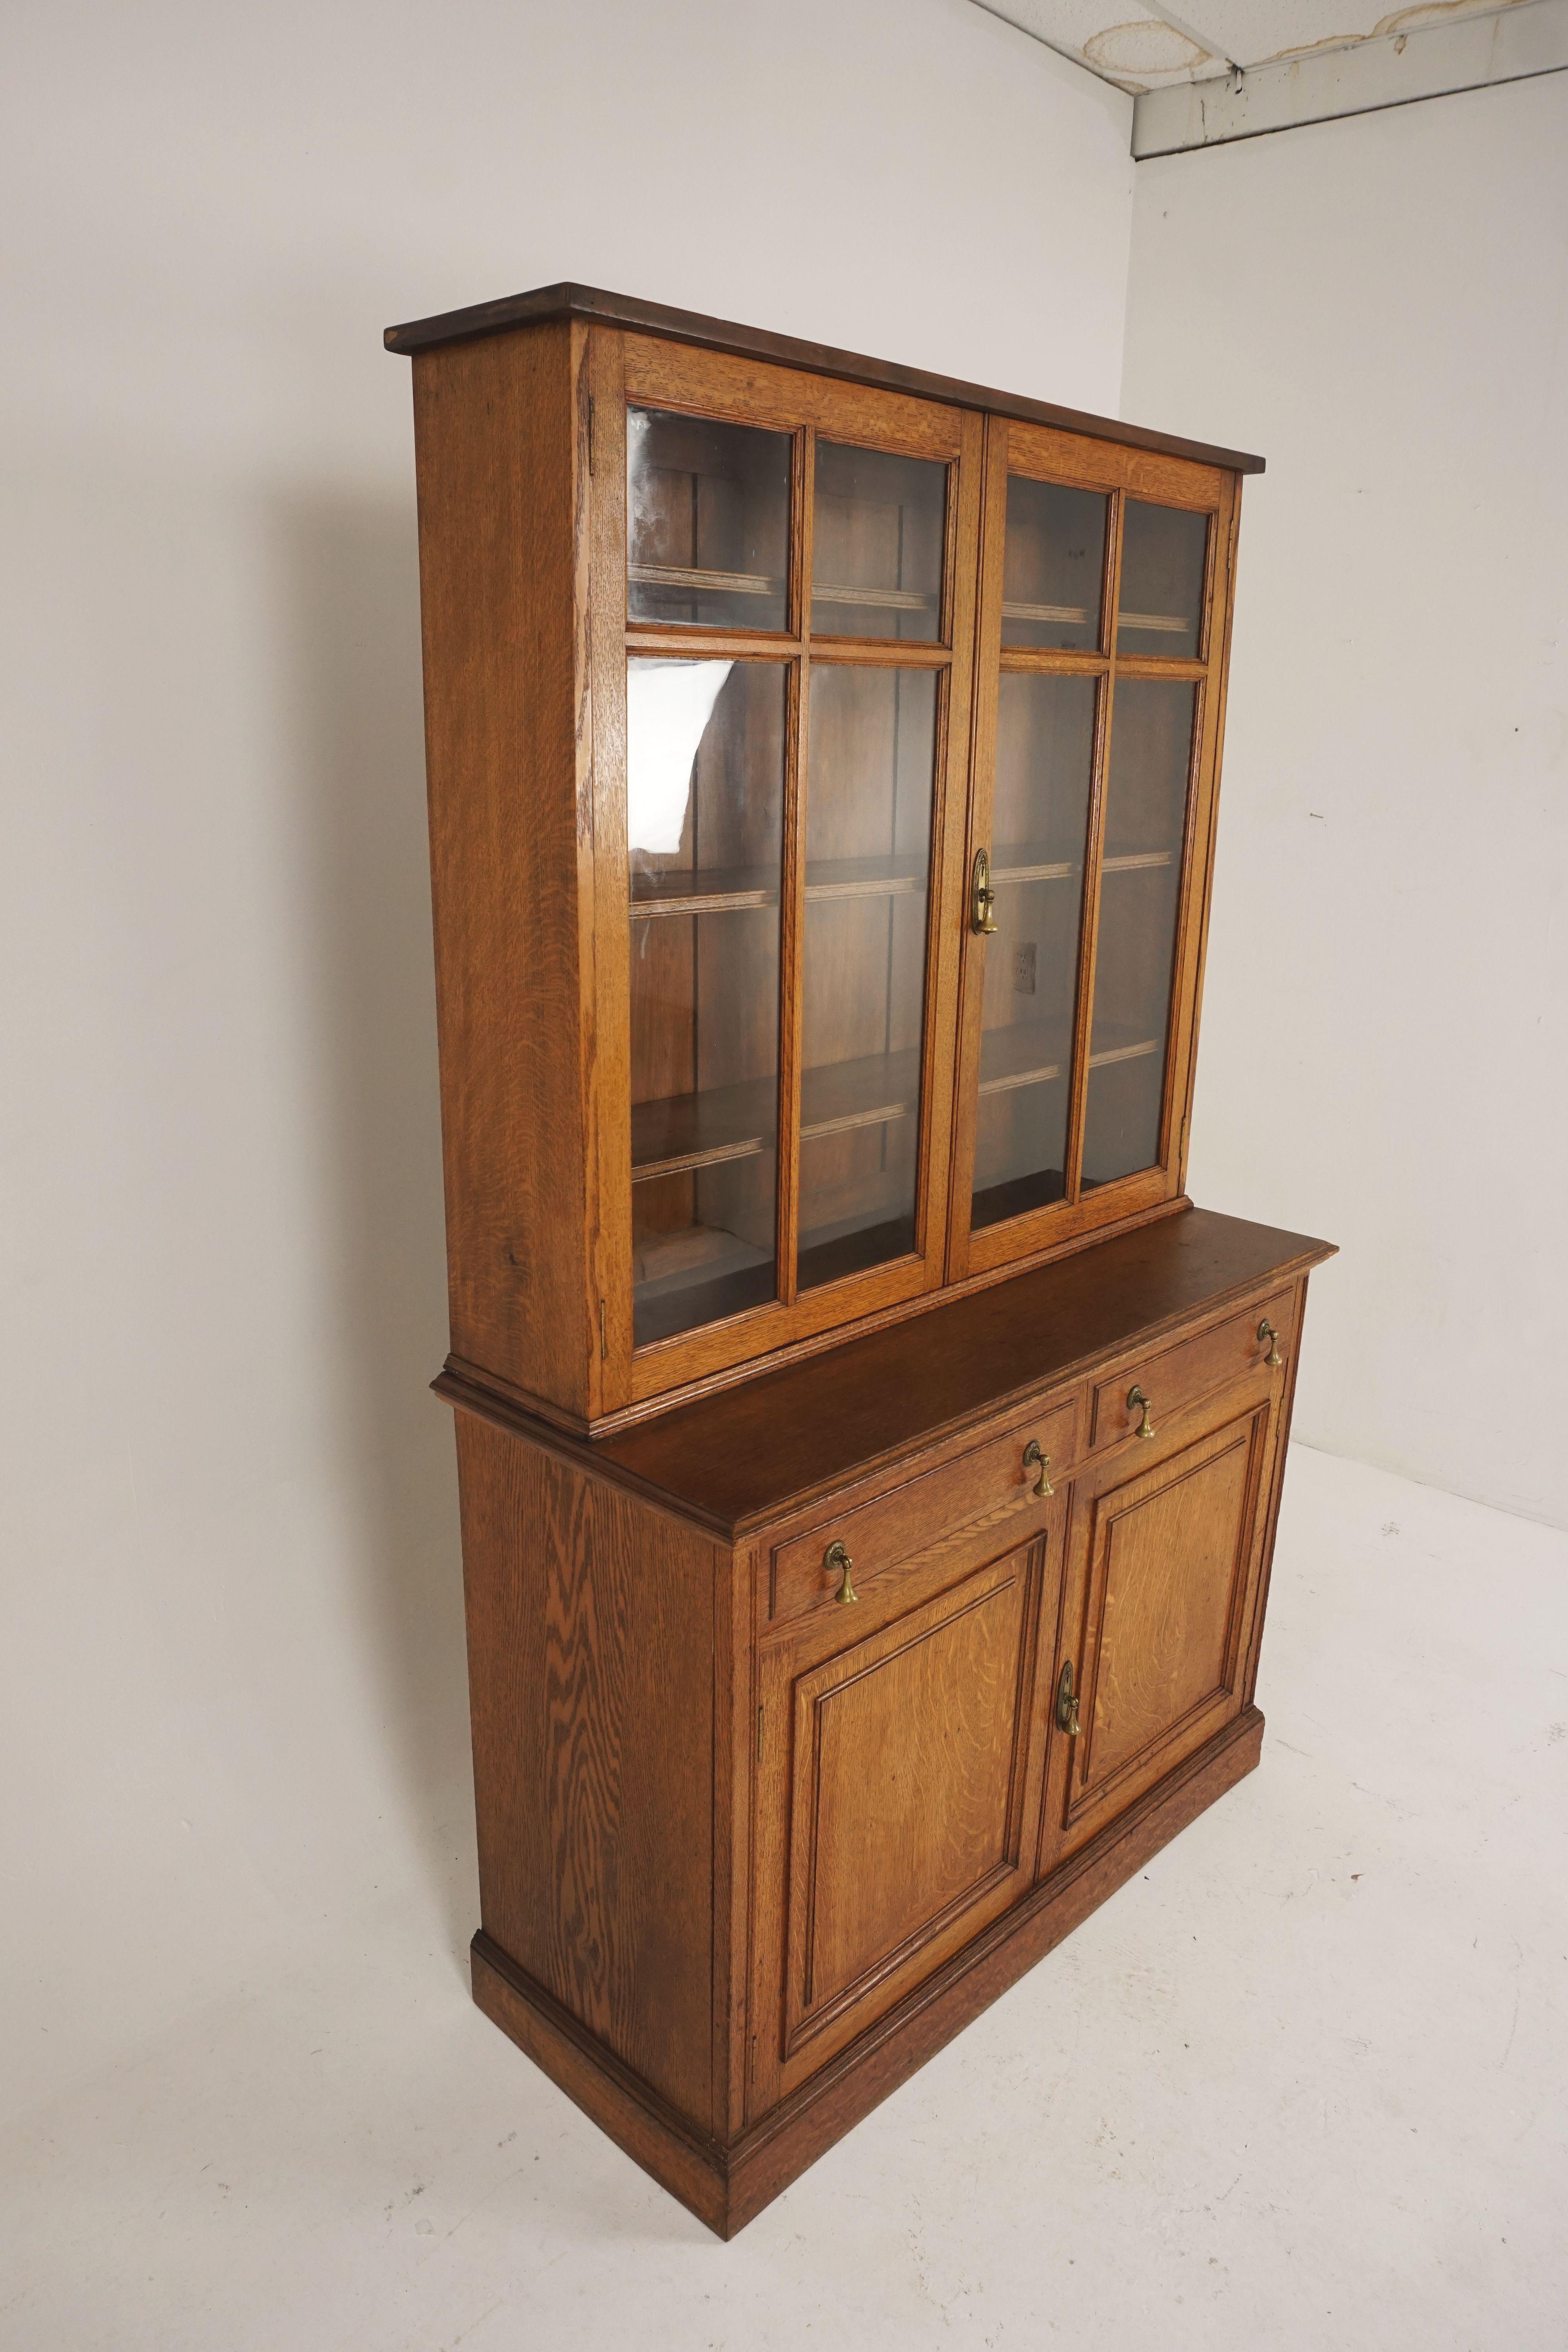 Early 20th Century Antique Gold Oak Cabinet Bookcase, Display Cabinet, Scotland 1910, B2471